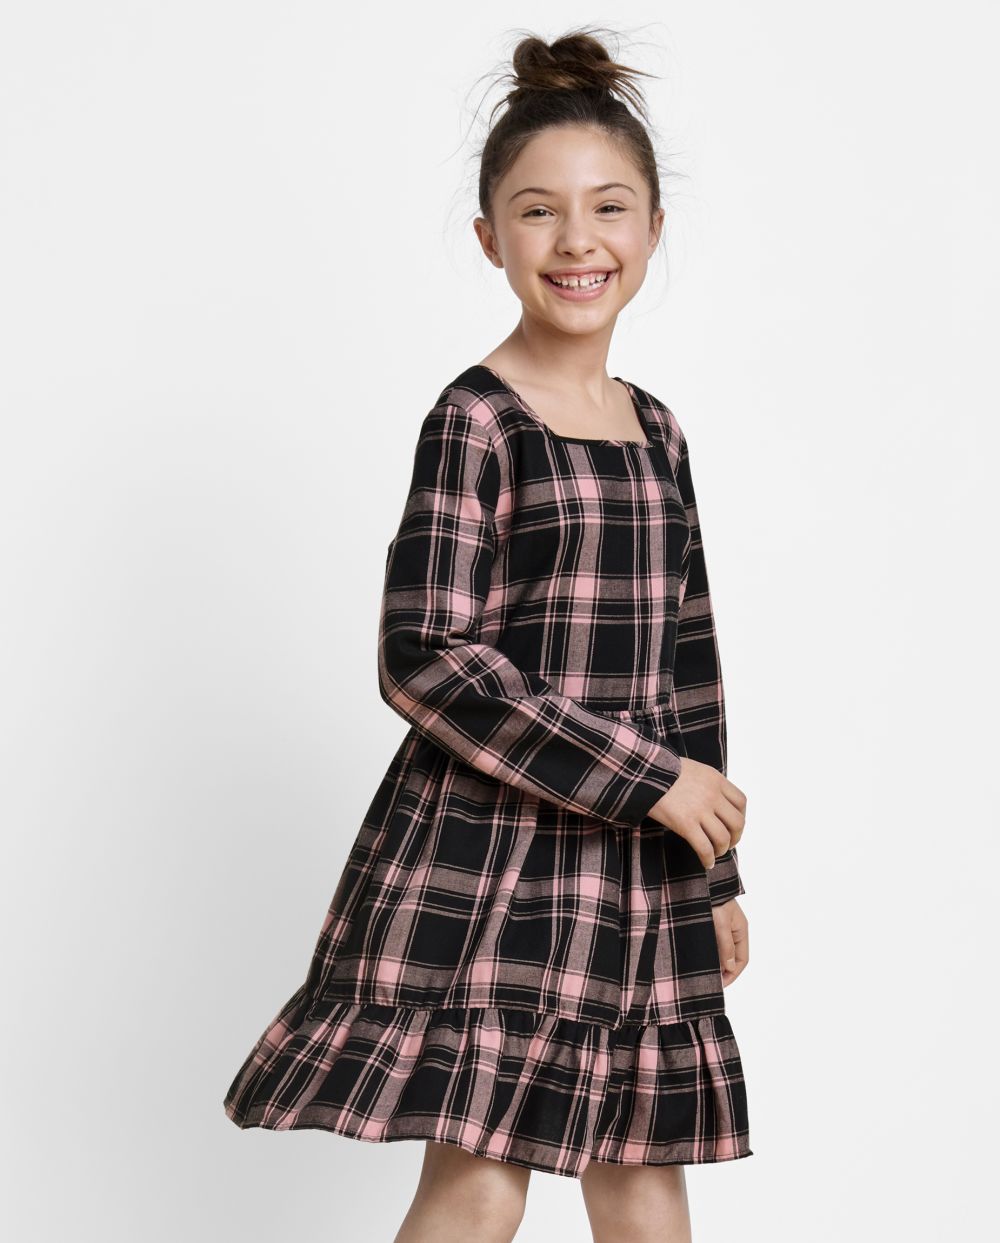 Girls Plaid Print Tiered Long Sleeves Square Neck Above the Knee Dress